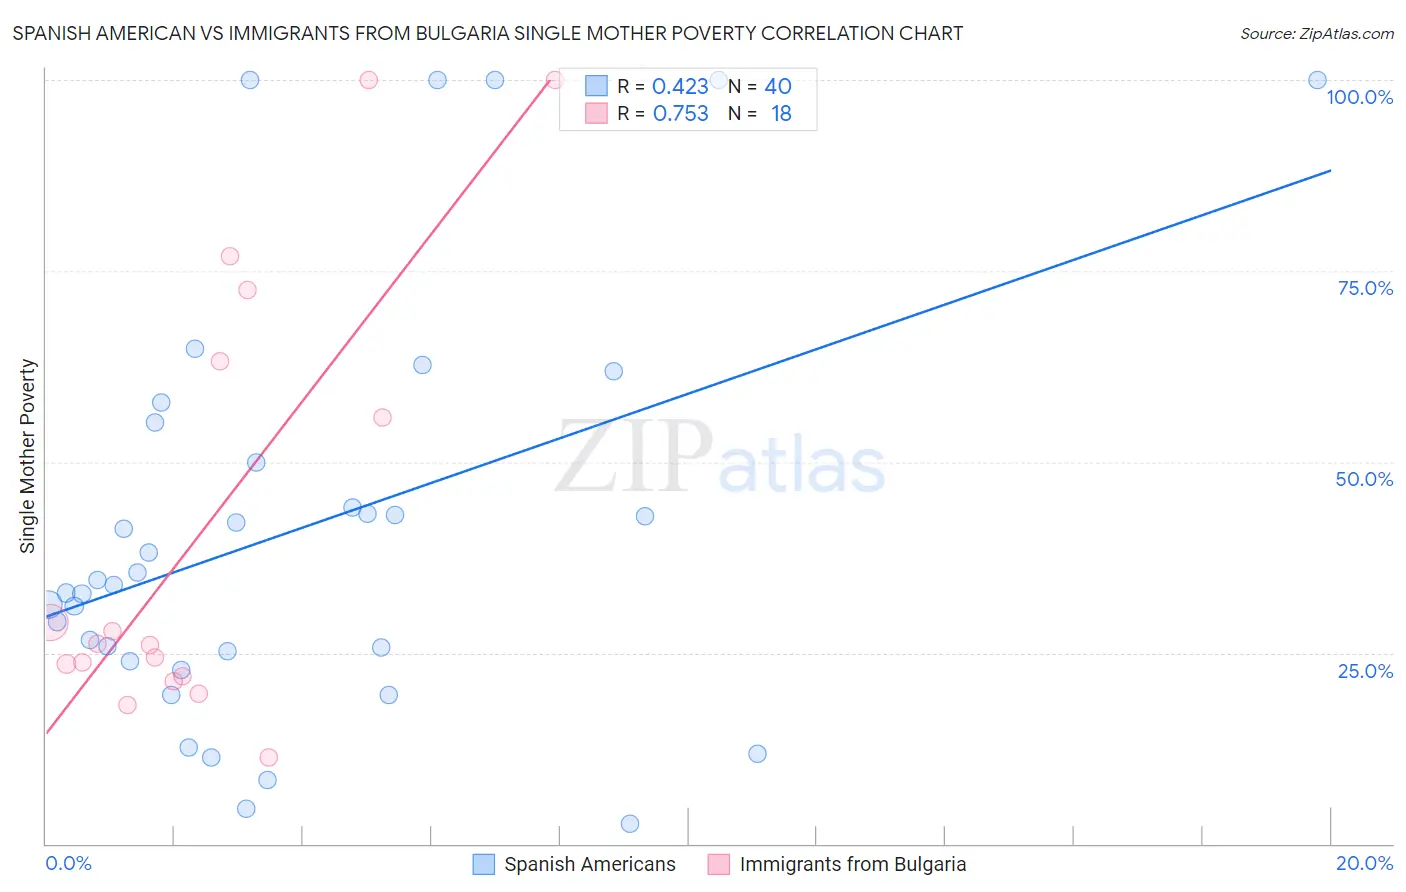 Spanish American vs Immigrants from Bulgaria Single Mother Poverty